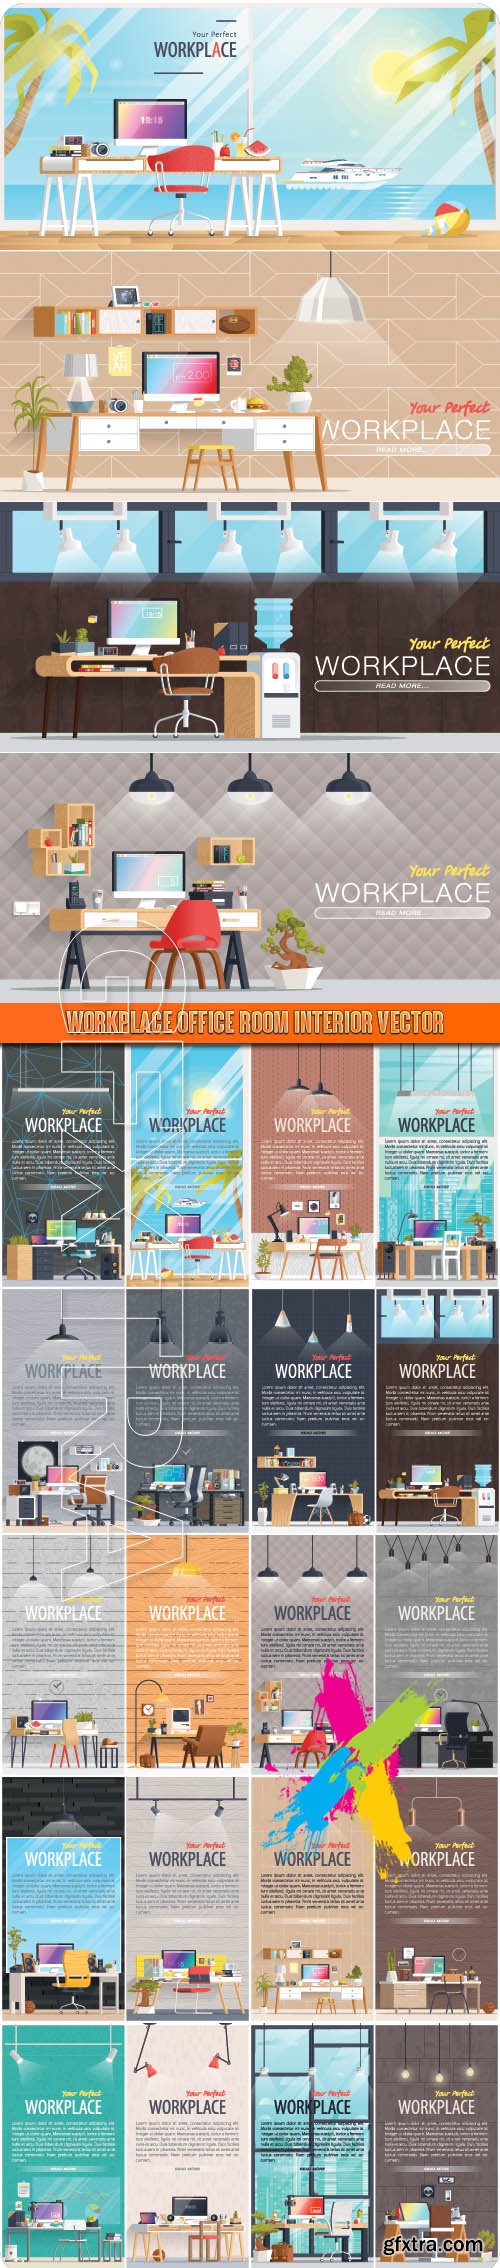 Workplace Office room interior vector